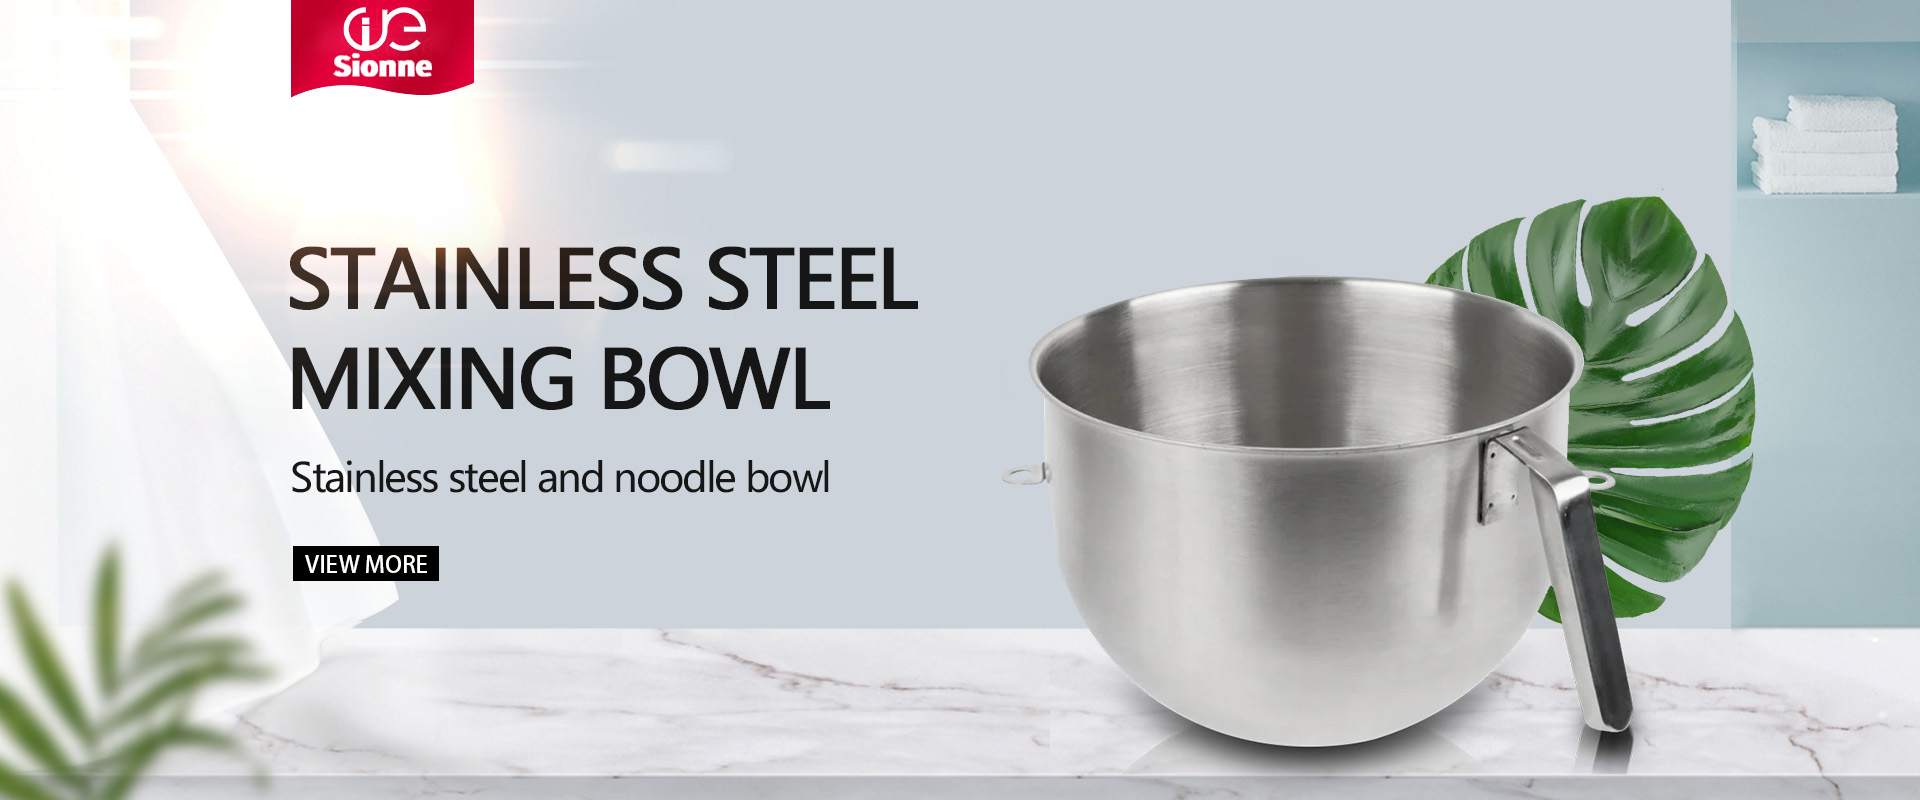 Stainless steel and noodle bowl